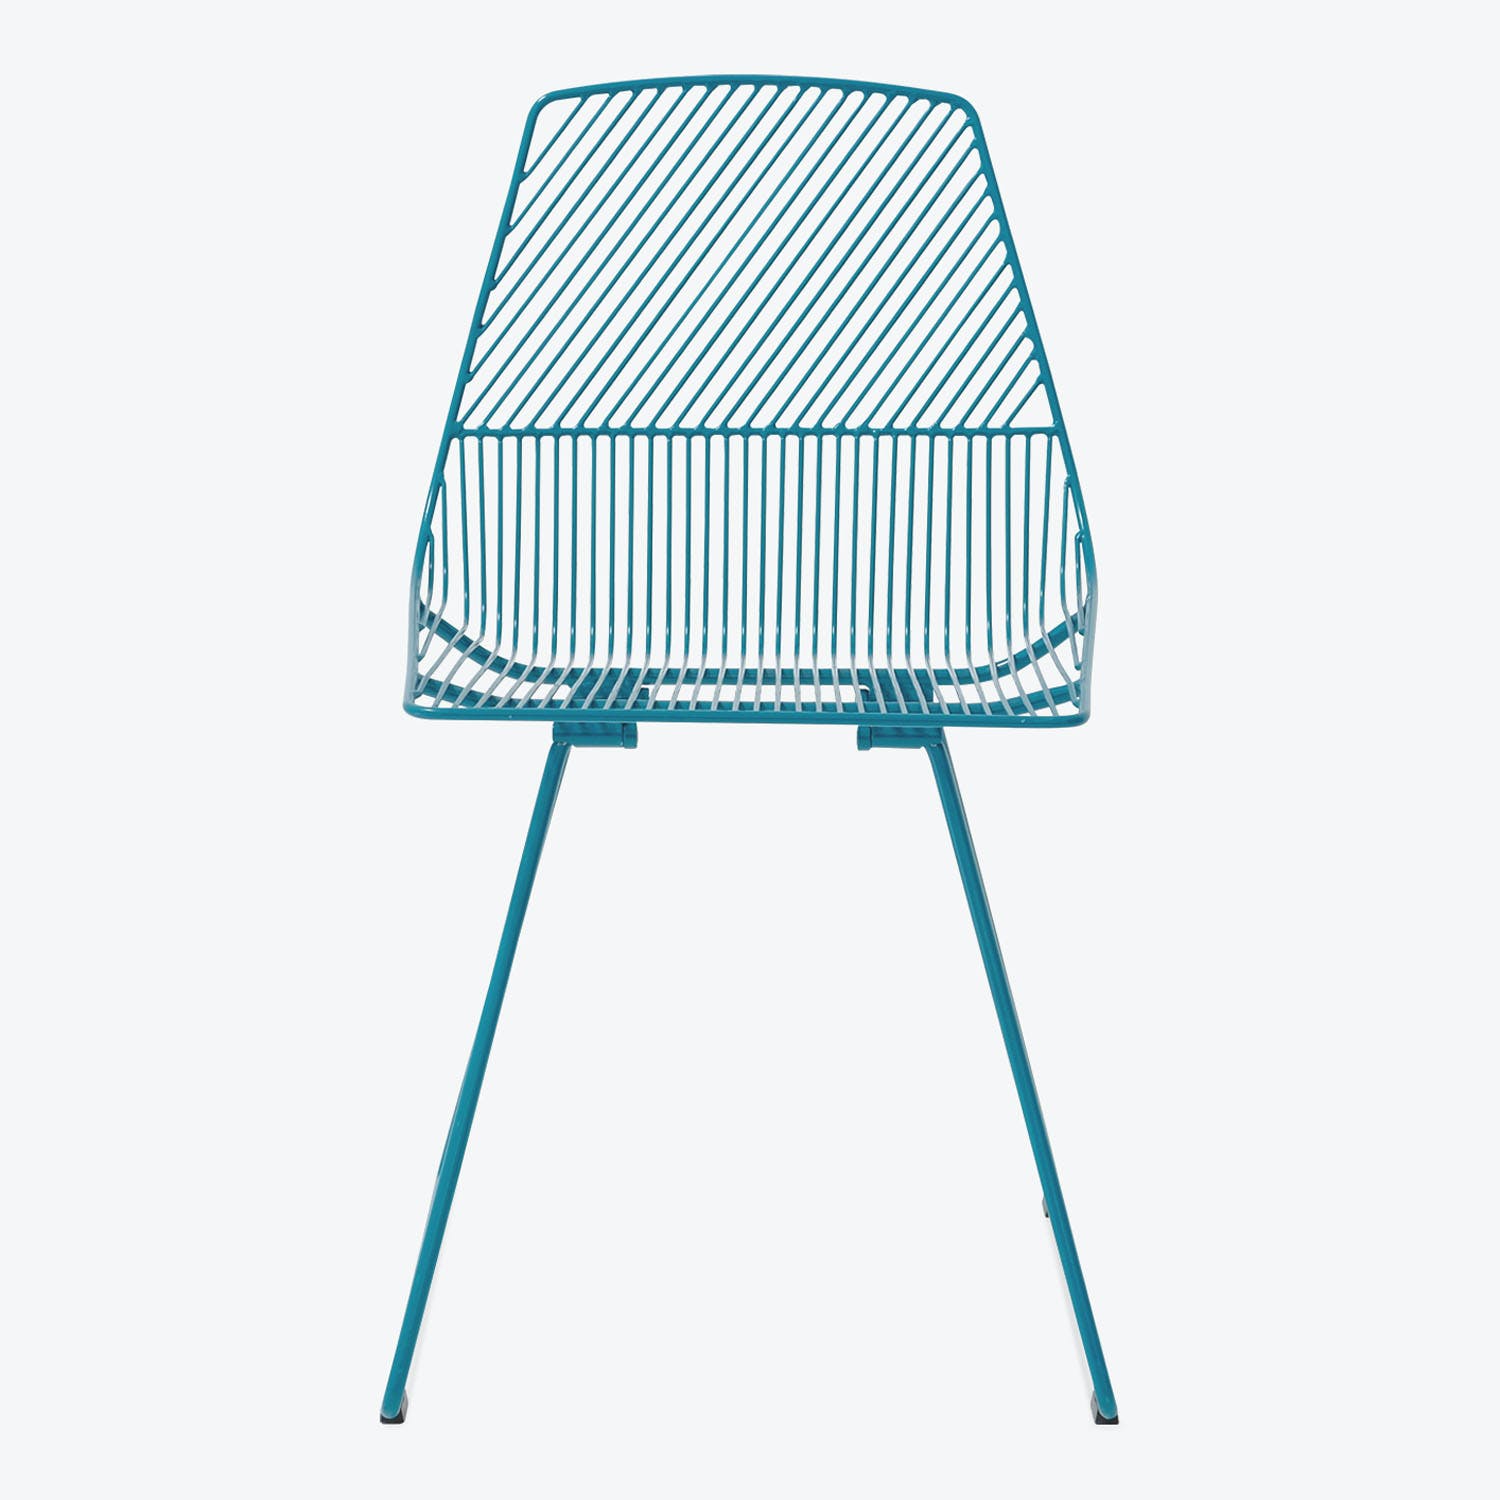 Modern teal wire chair with minimalist design against white background.